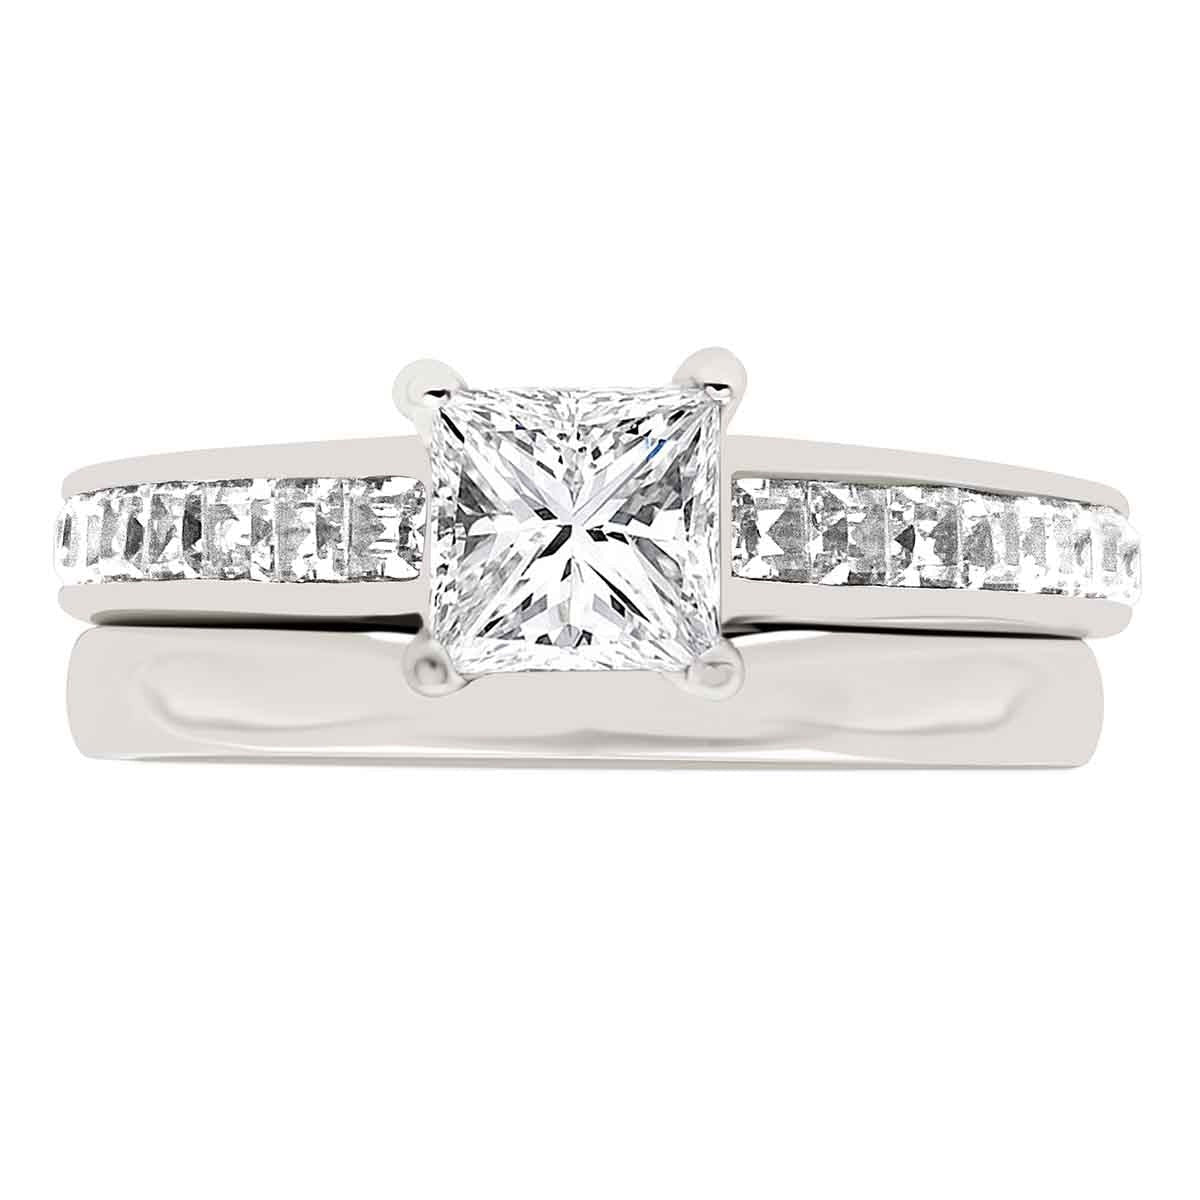 Princess Shape Diamond Ring made from white gold with a matching plain gold wedding ring